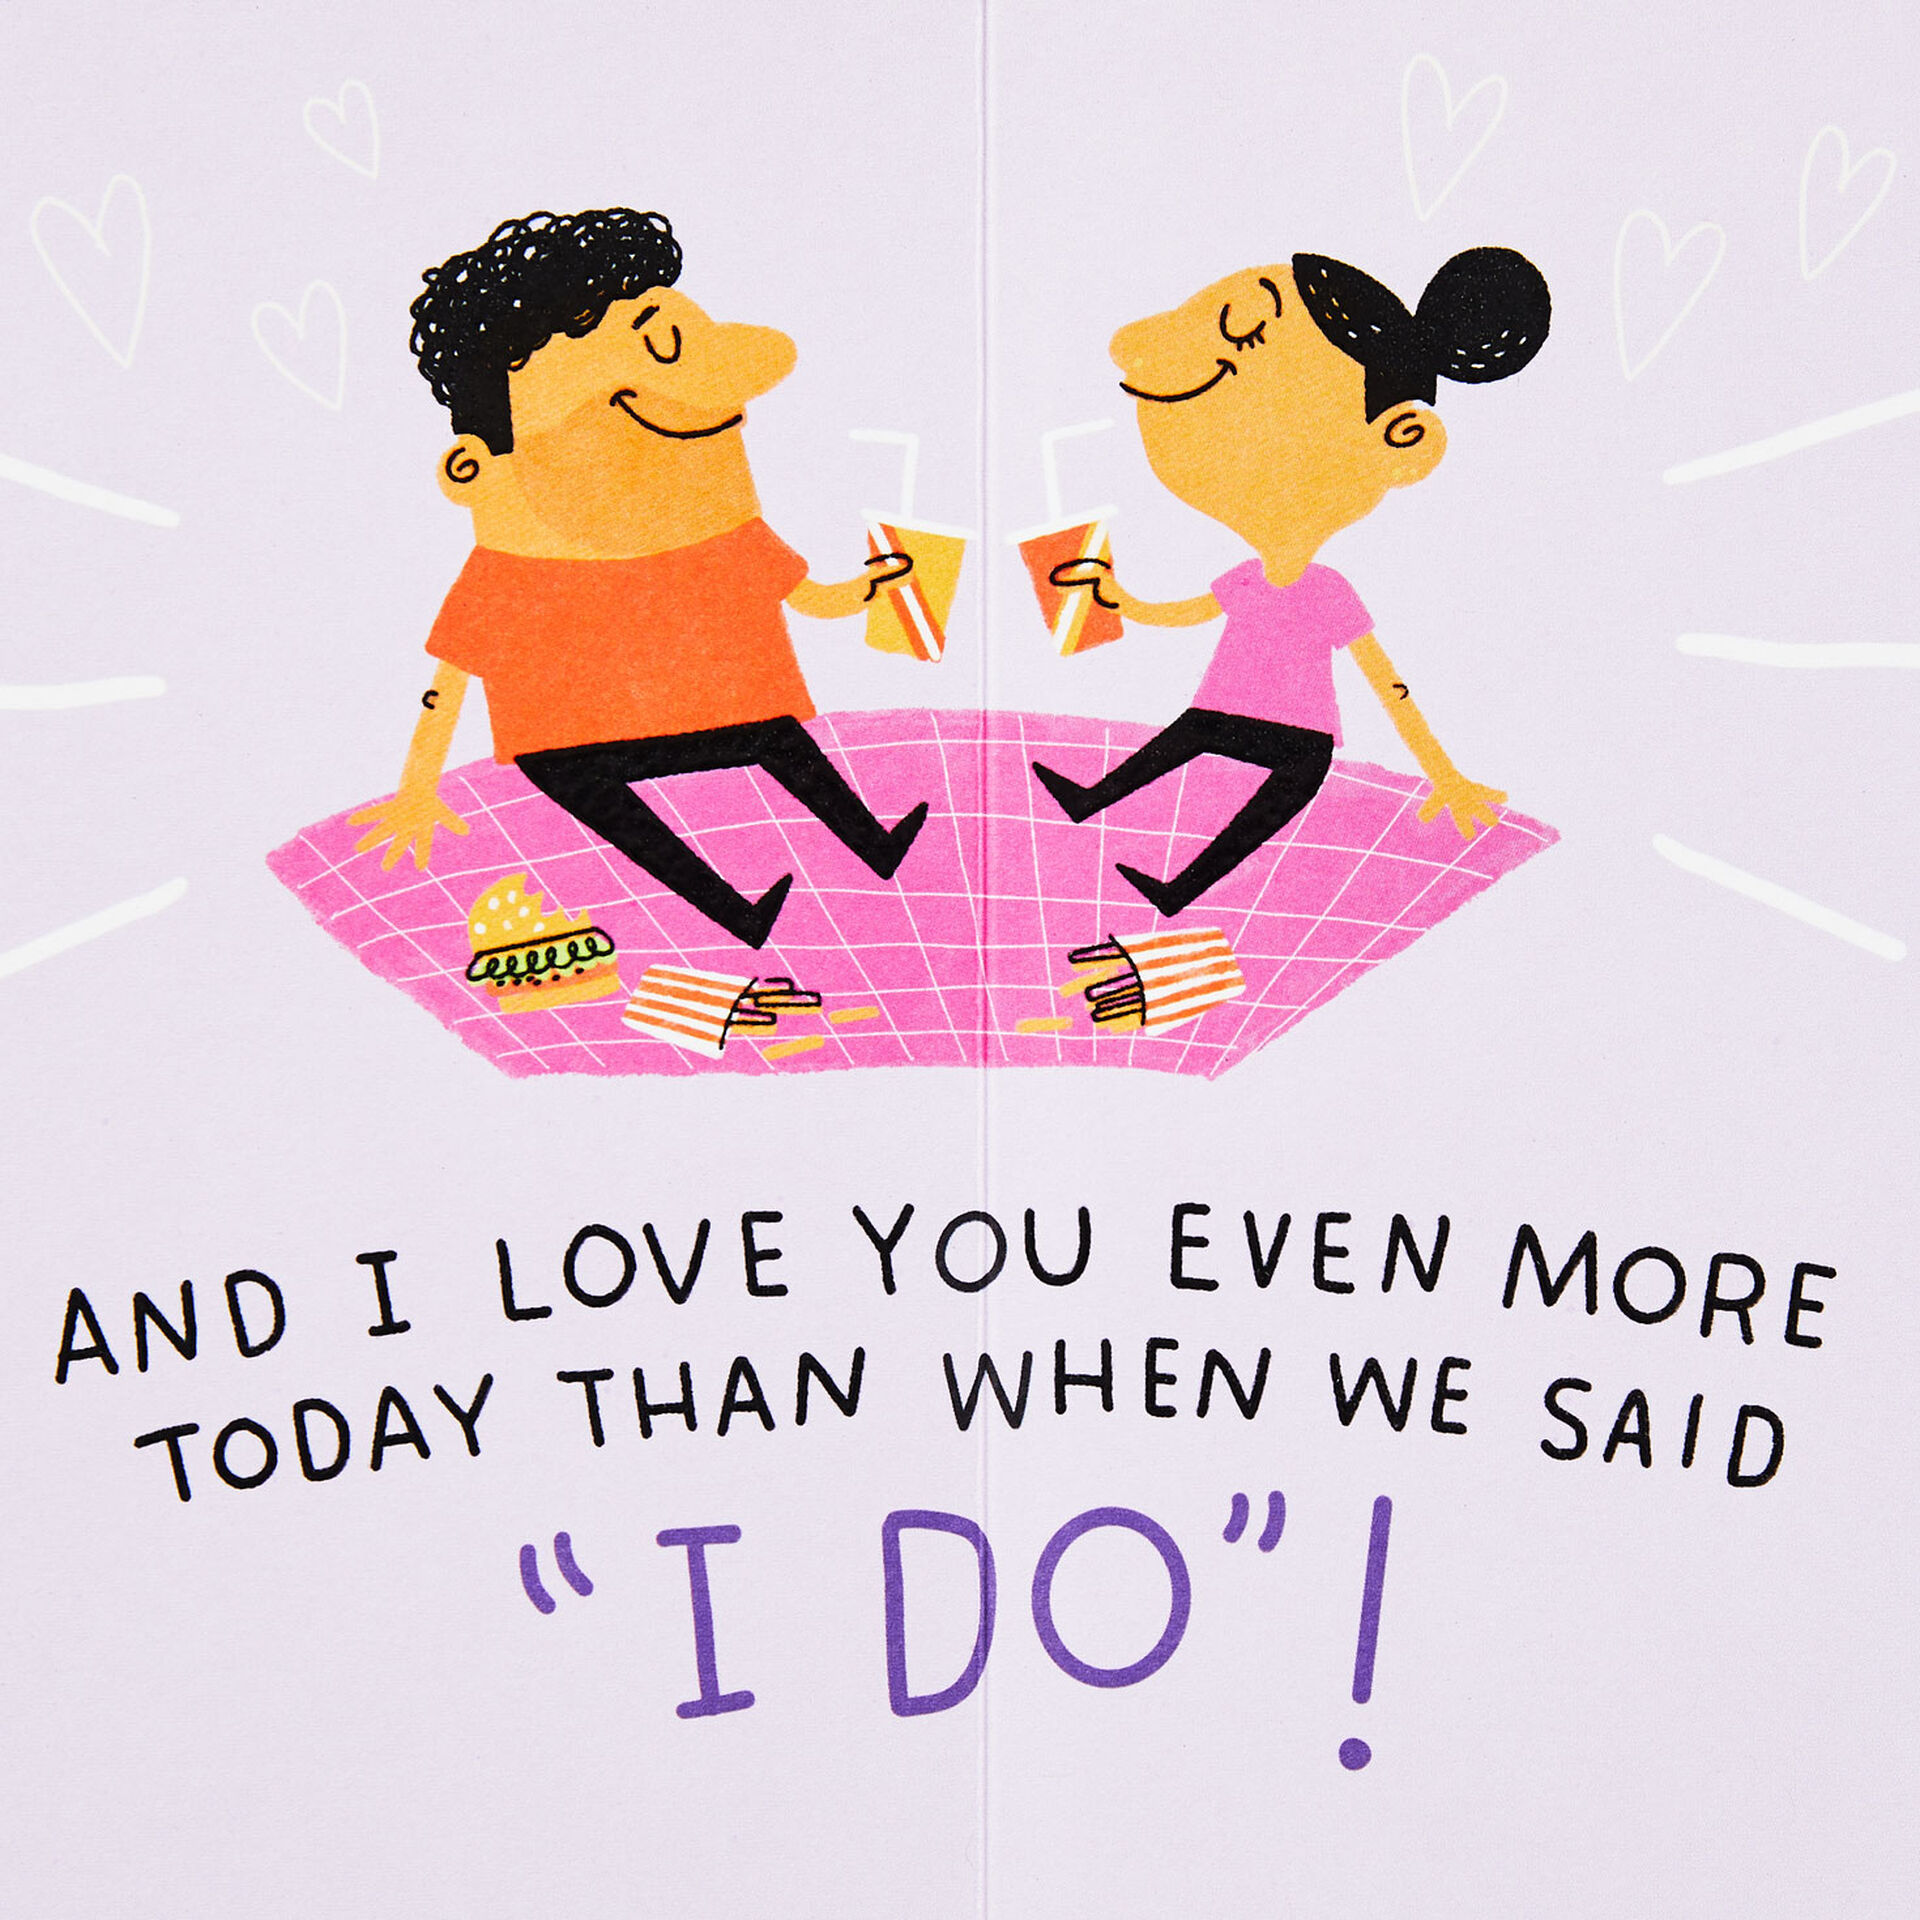 Husband-and-Wife-Characters-Anniversary-Card-for-Wife_499AVY3213_02